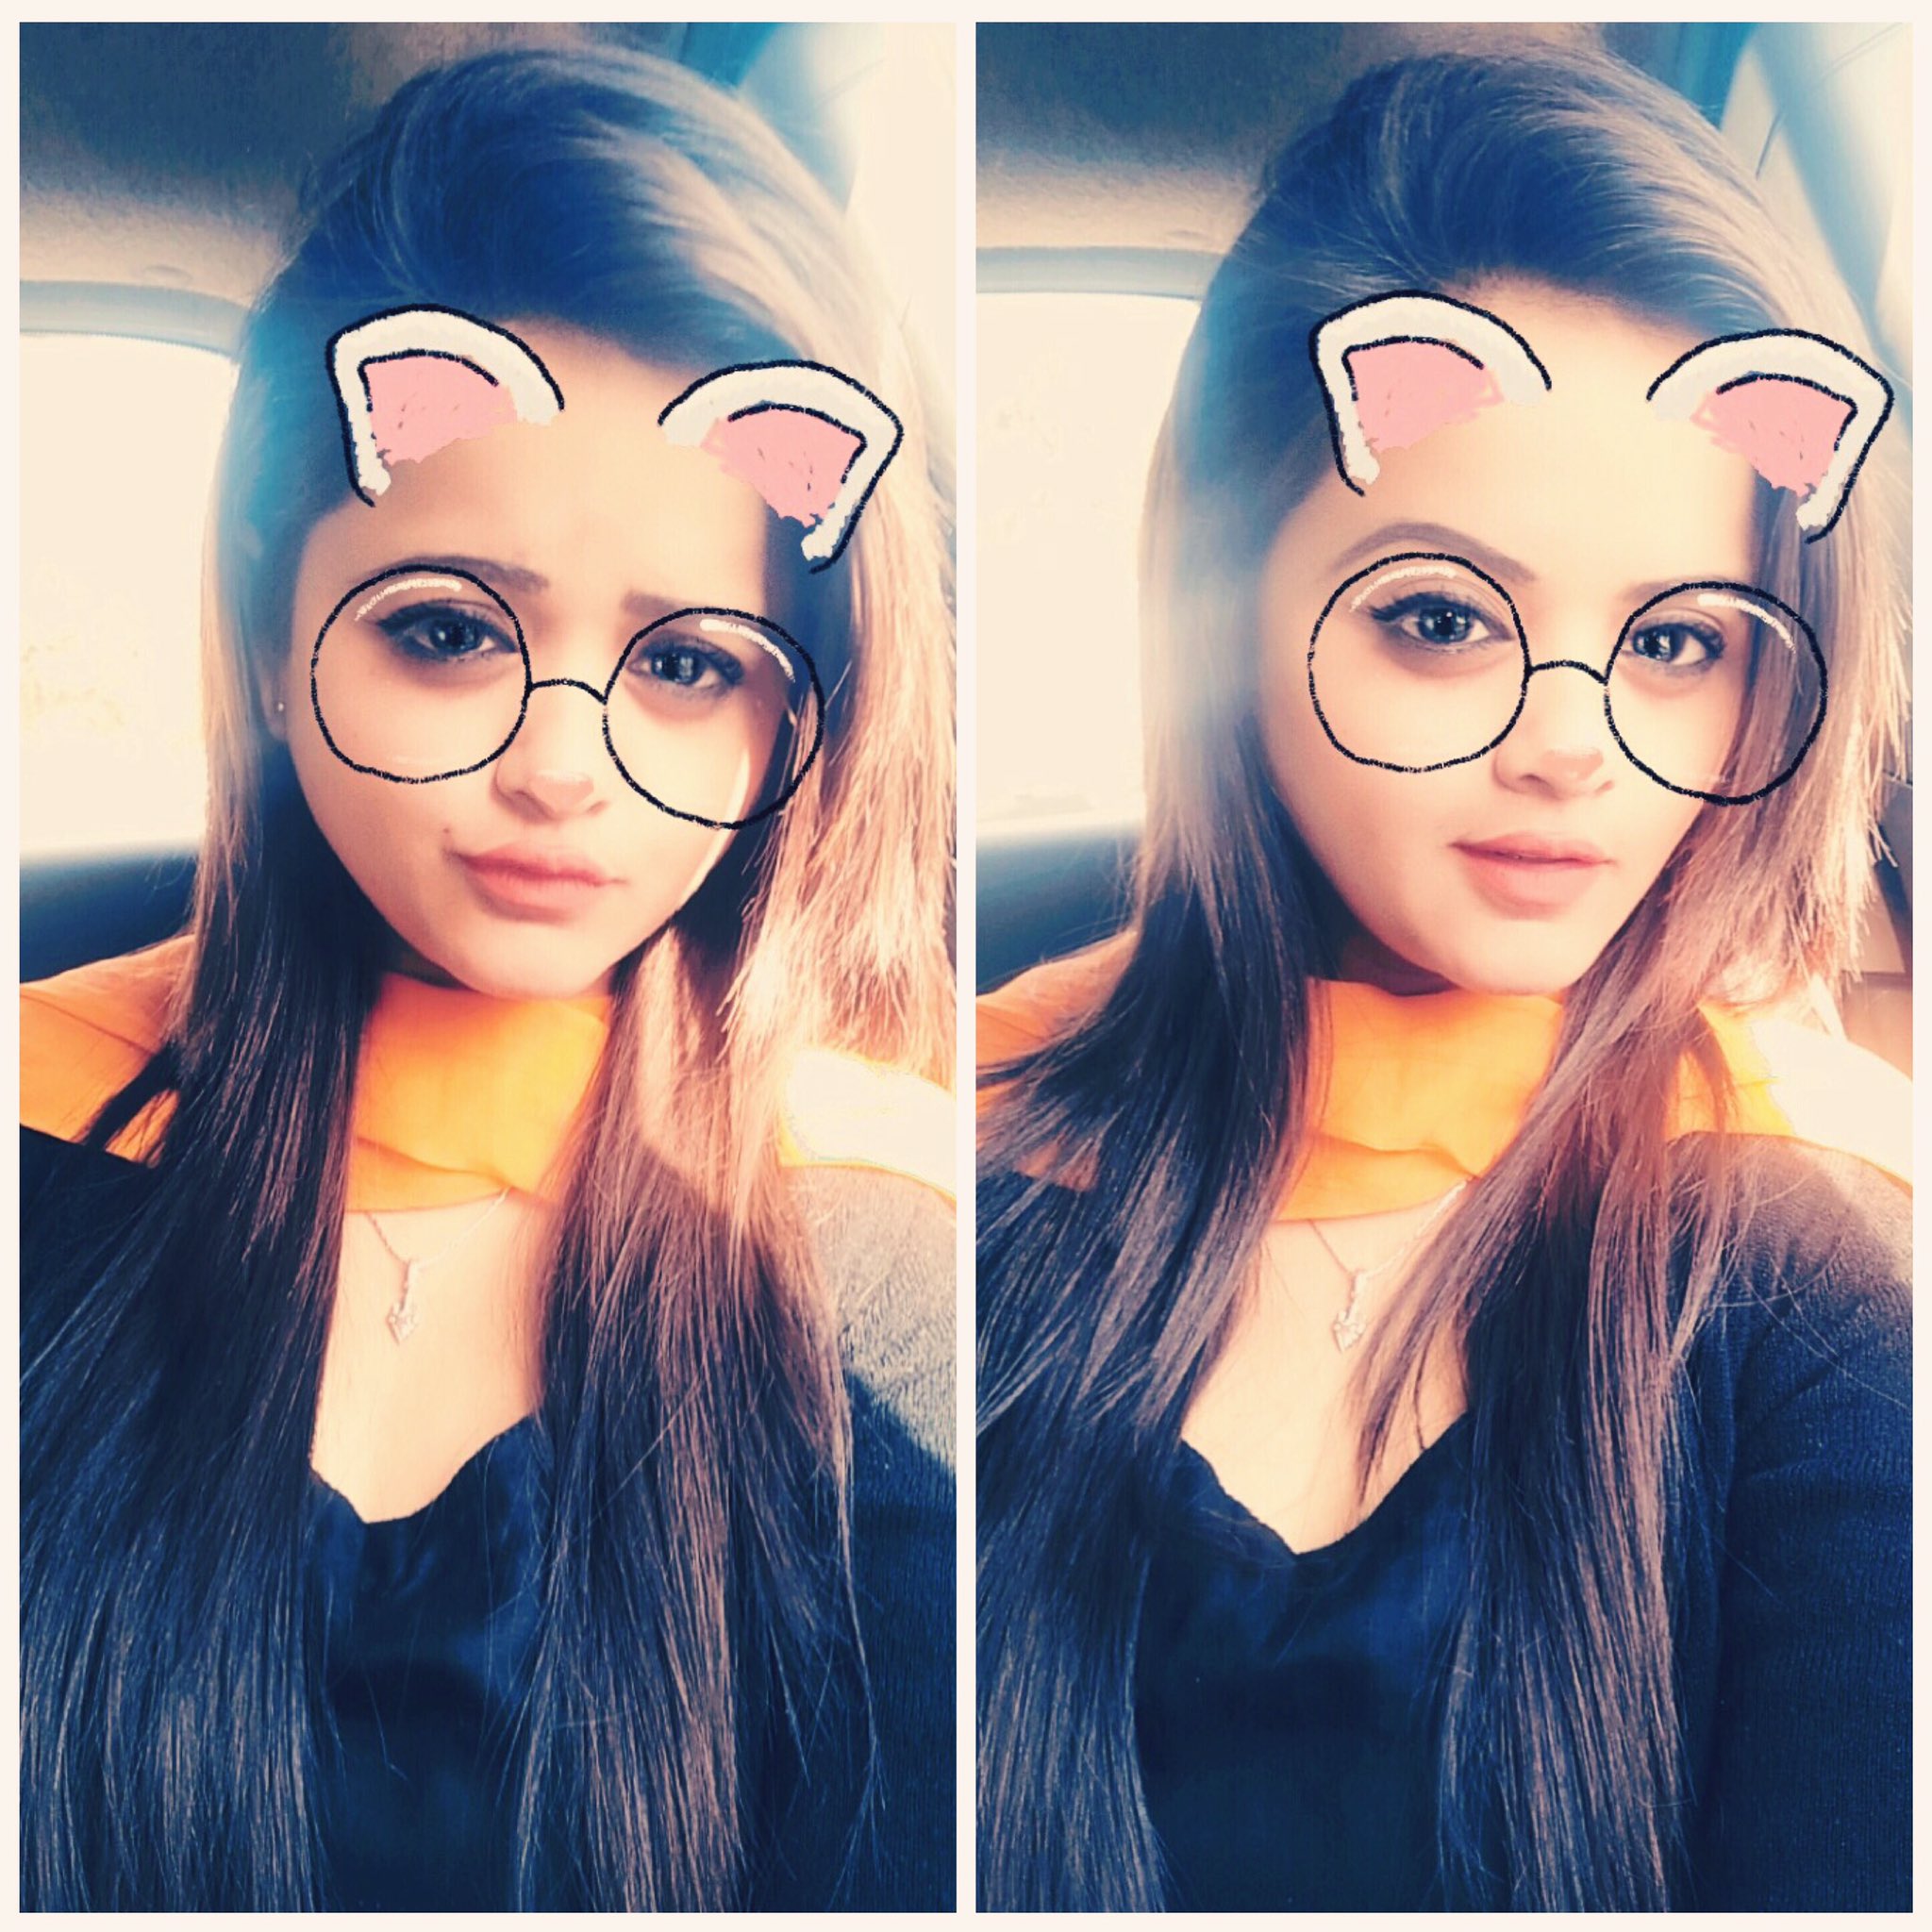 girls dp Images • silpi sona (h.s.) (@silpisona) on ShareChat